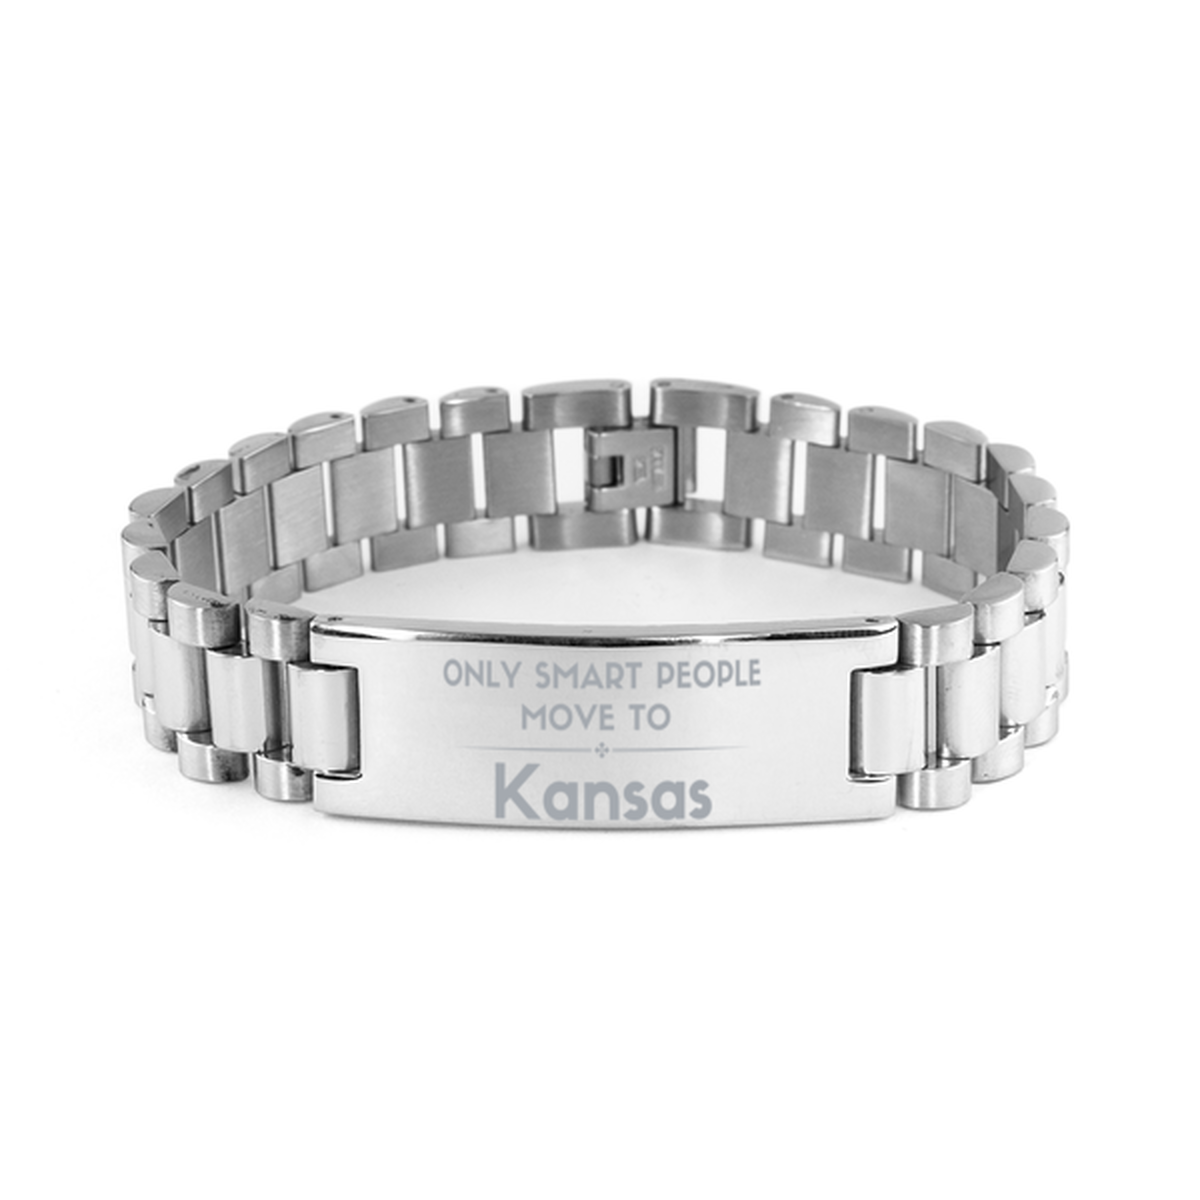 Only smart people move to Kansas Ladder Stainless Steel Bracelet, Gag Gifts For Kansas, Move to Kansas Gifts for Friends Coworker Funny Saying Quote